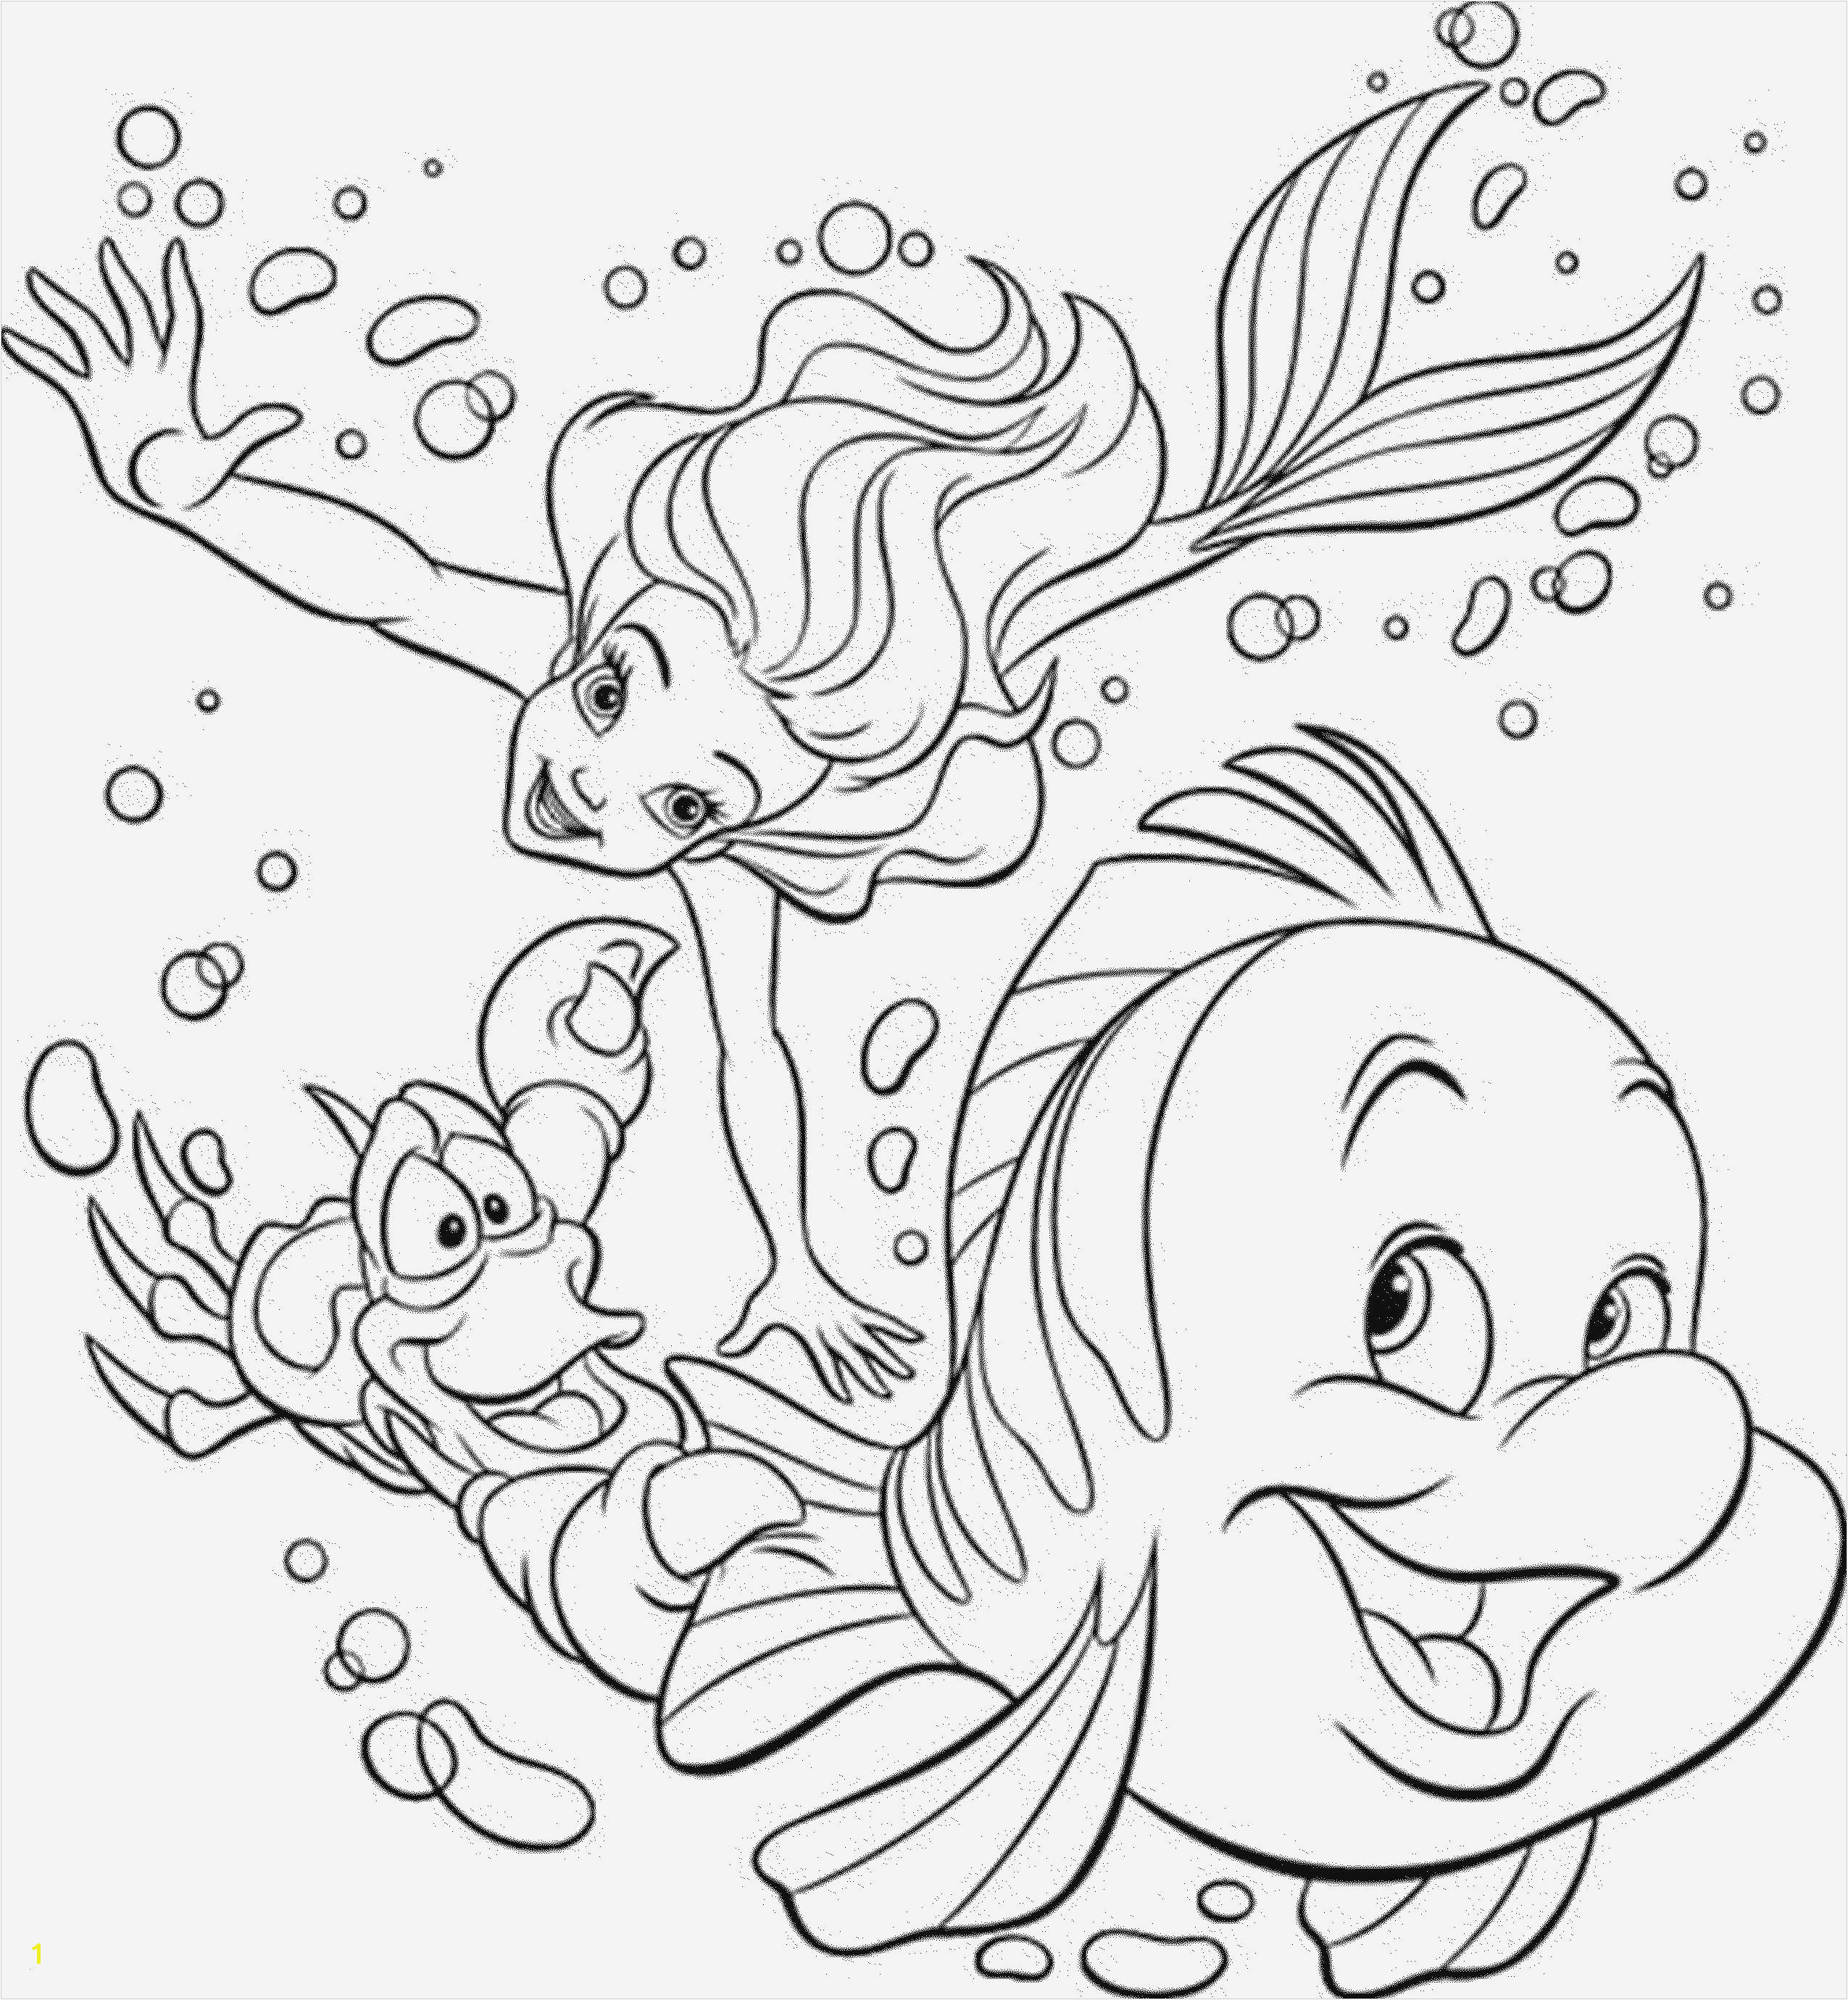 1st Grade Coloring Pages Luxury 45 Beautiful S 1st Grade Coloring